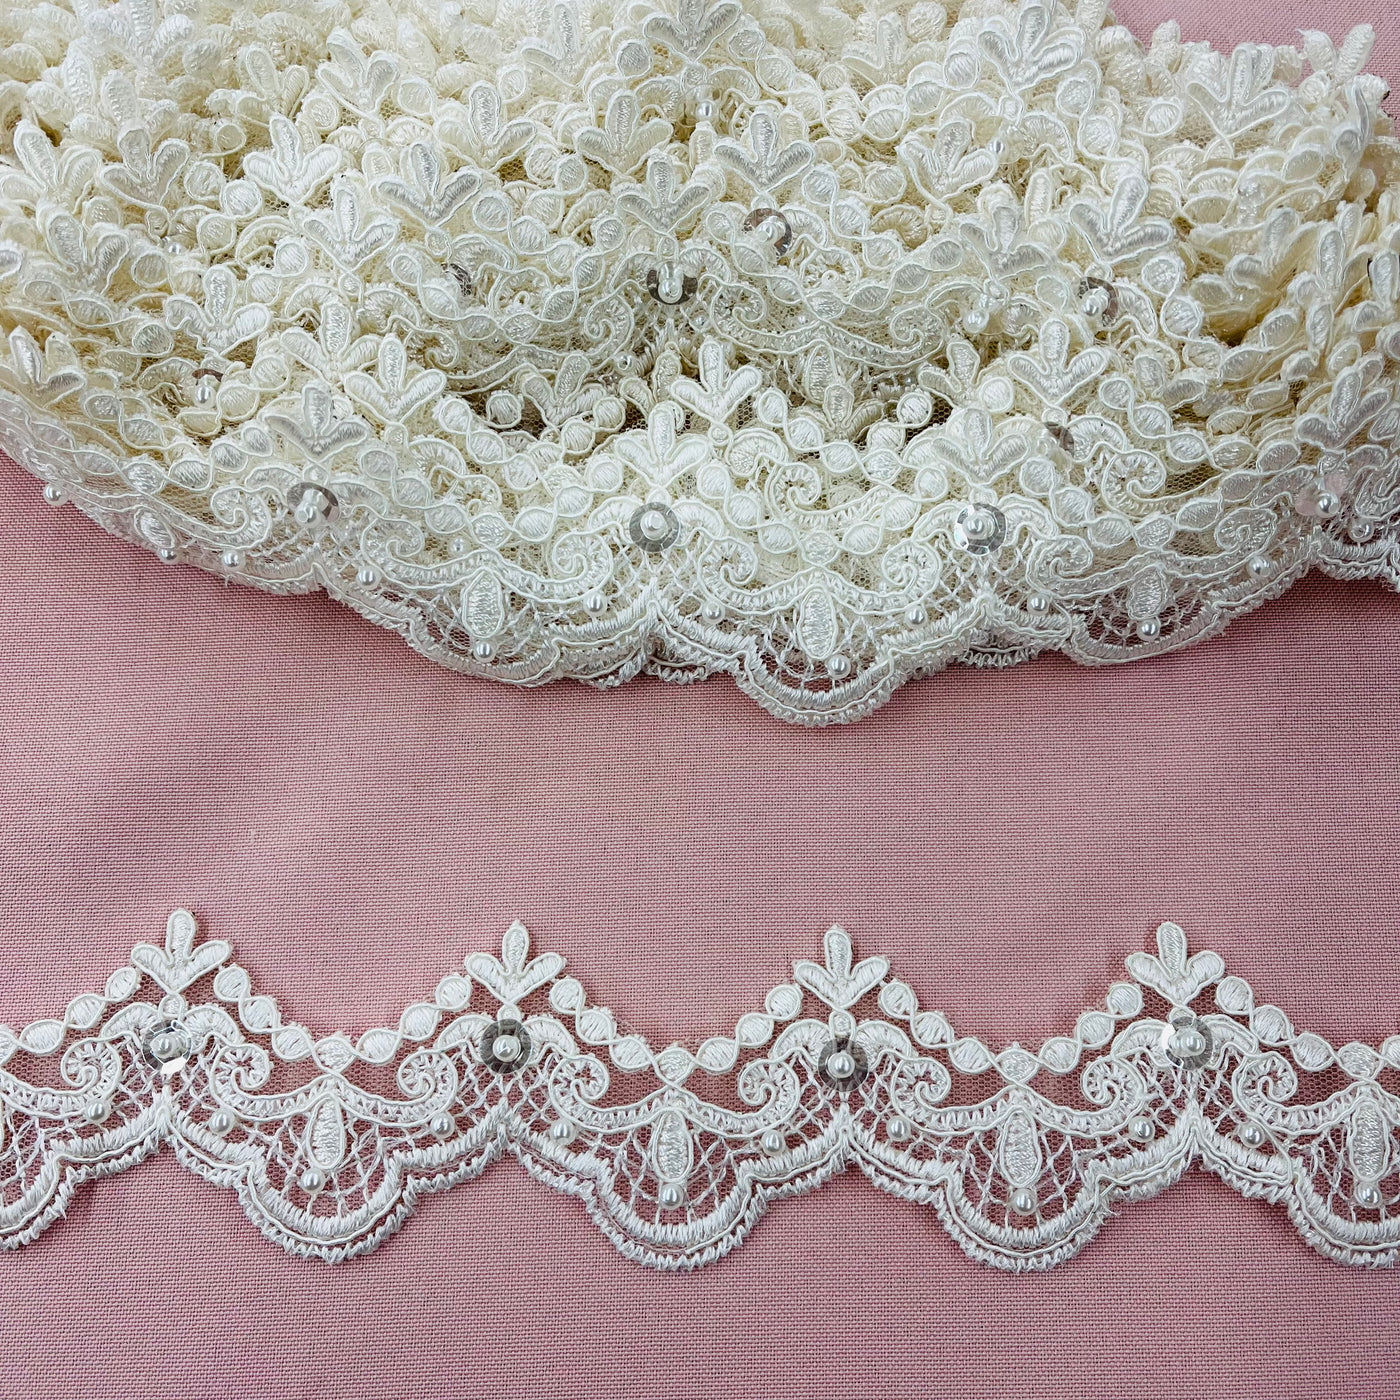 Beaded & Corded Ivory Lace Trimming Embroidered on 100% Polyester  Net Mesh | Lace USA